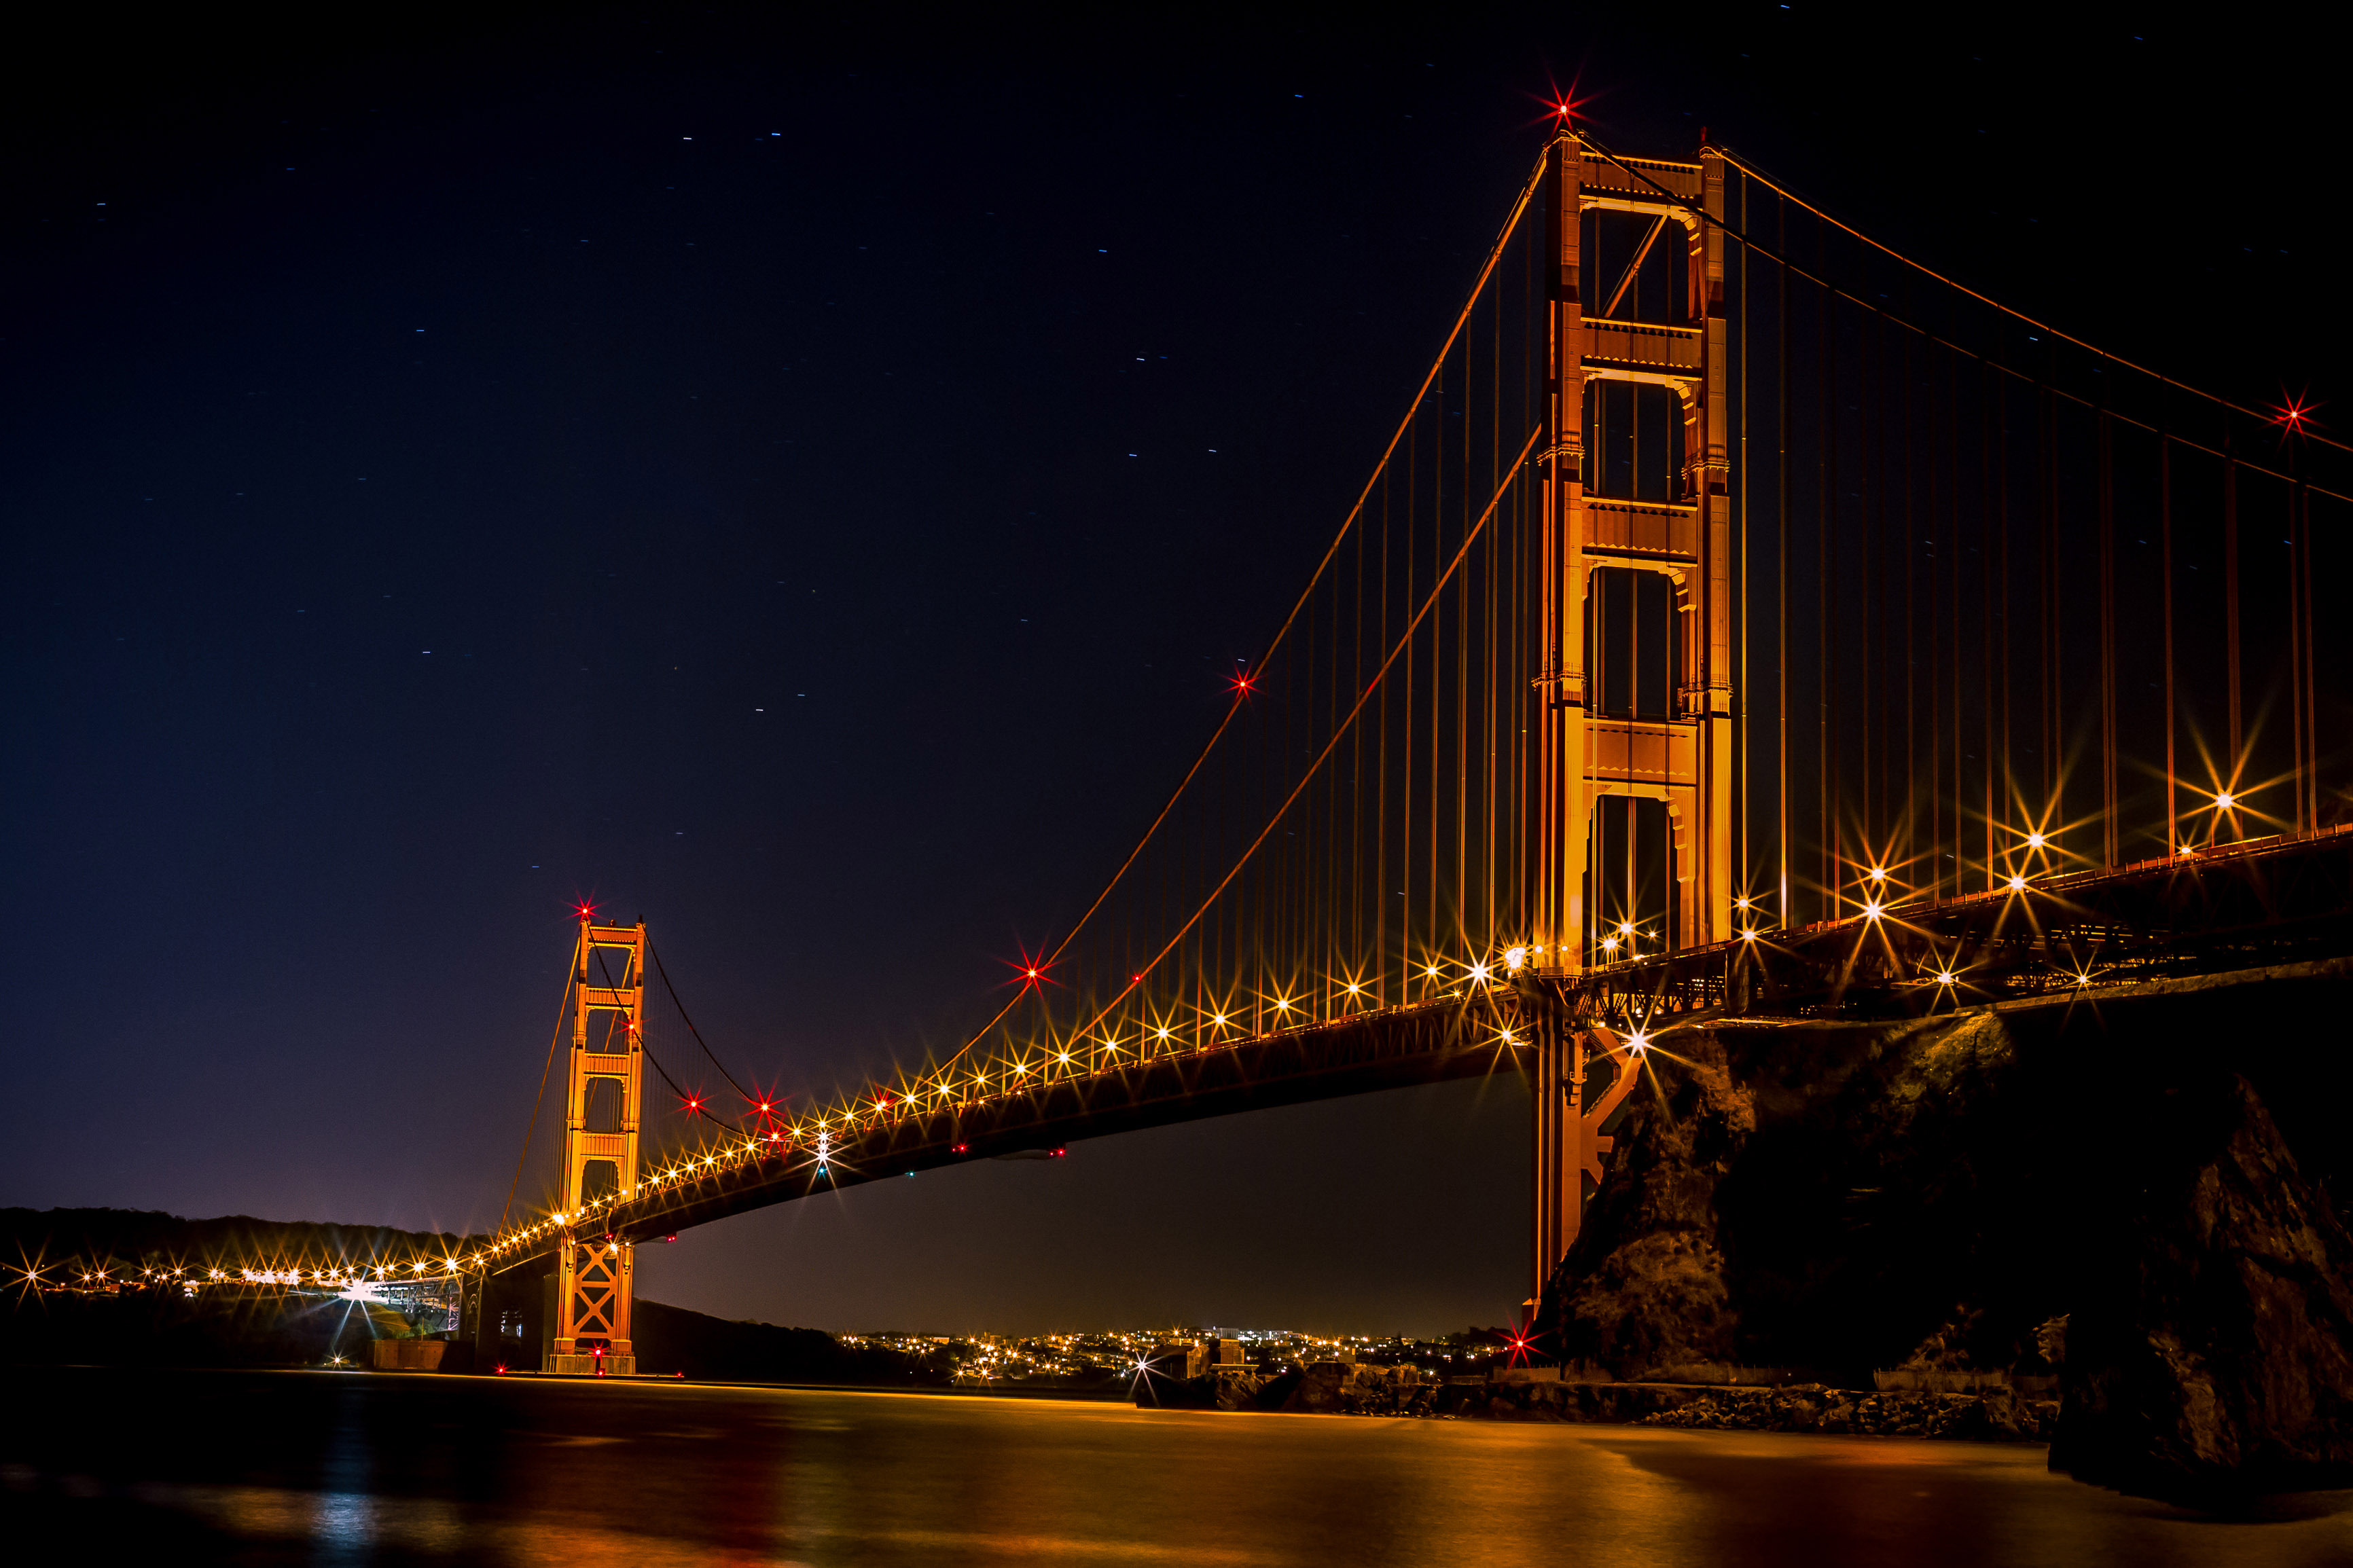 Golden Gate Bridge over the bay at night illuminated in Gold in San